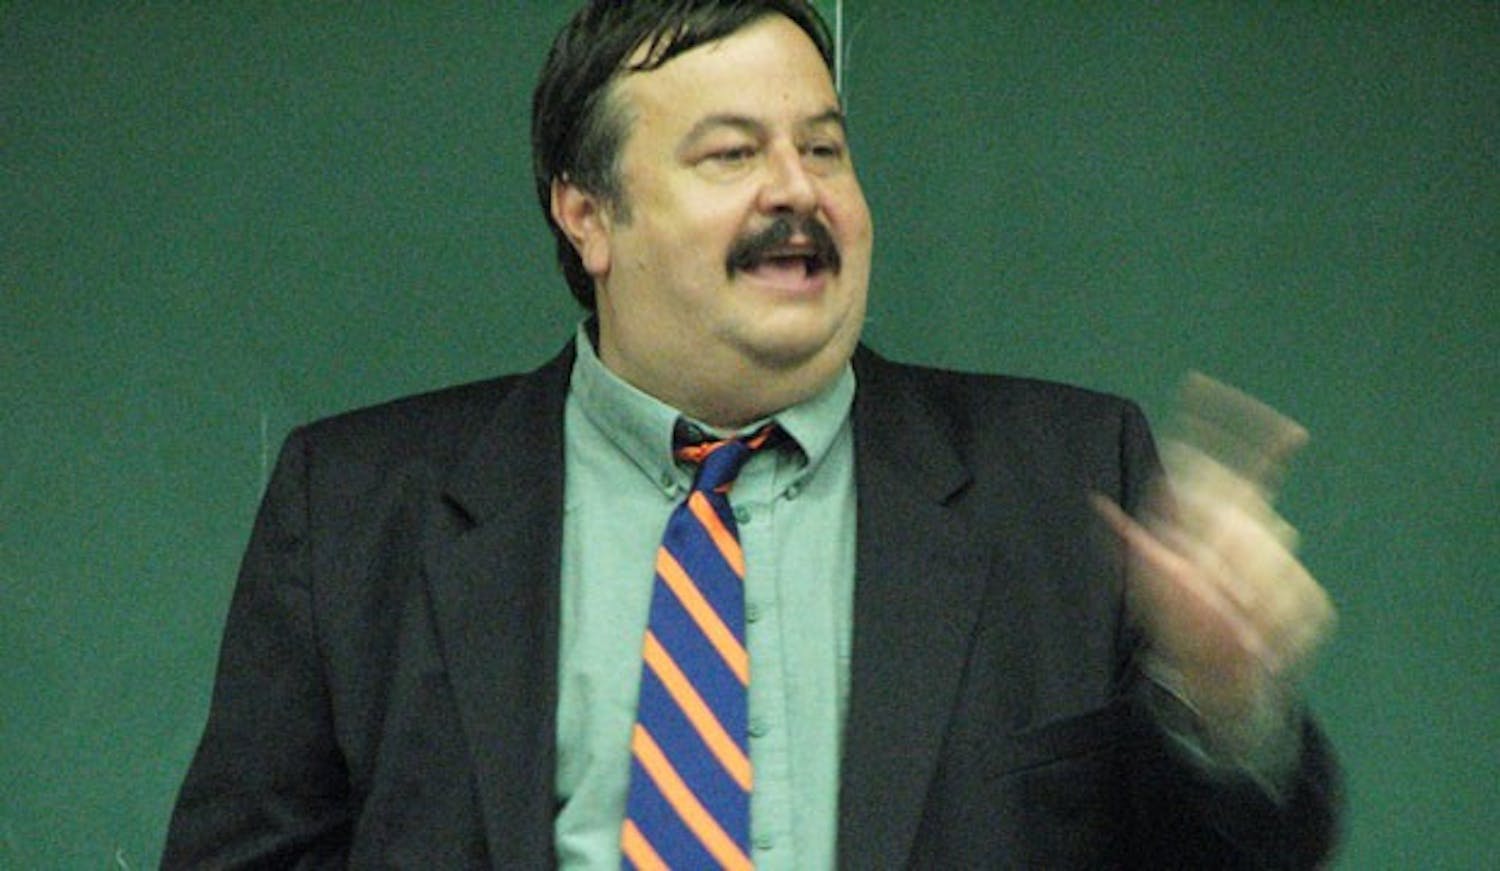 Gerald Kish, an adjunct professor at UF, died last Friday while scuba diving in Mexico. This photo was taken at a public-speaking forum on March 26, 2009.